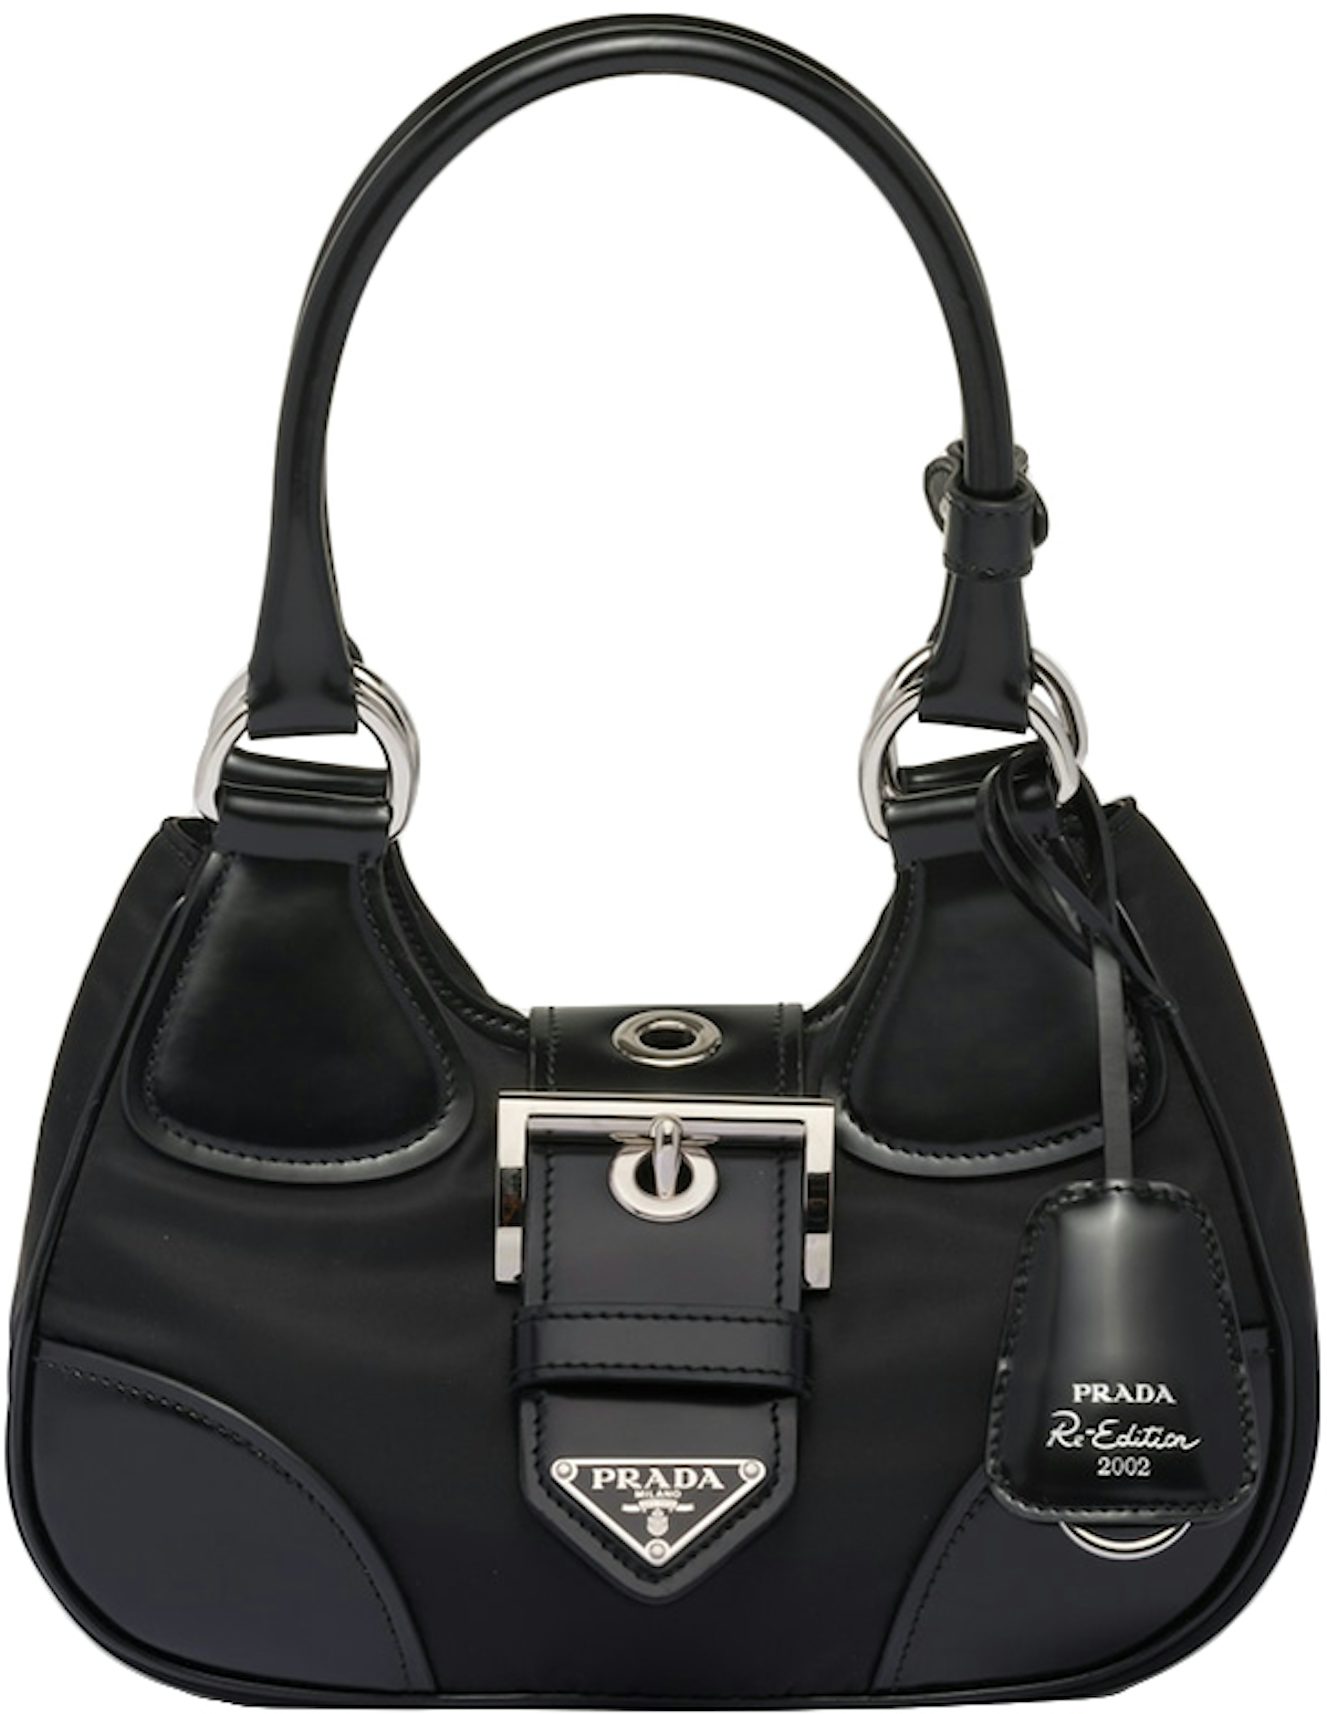 Prada Re-Nylon and Saffiano Leather (Removable Pouch) Shoulder Bag Navy